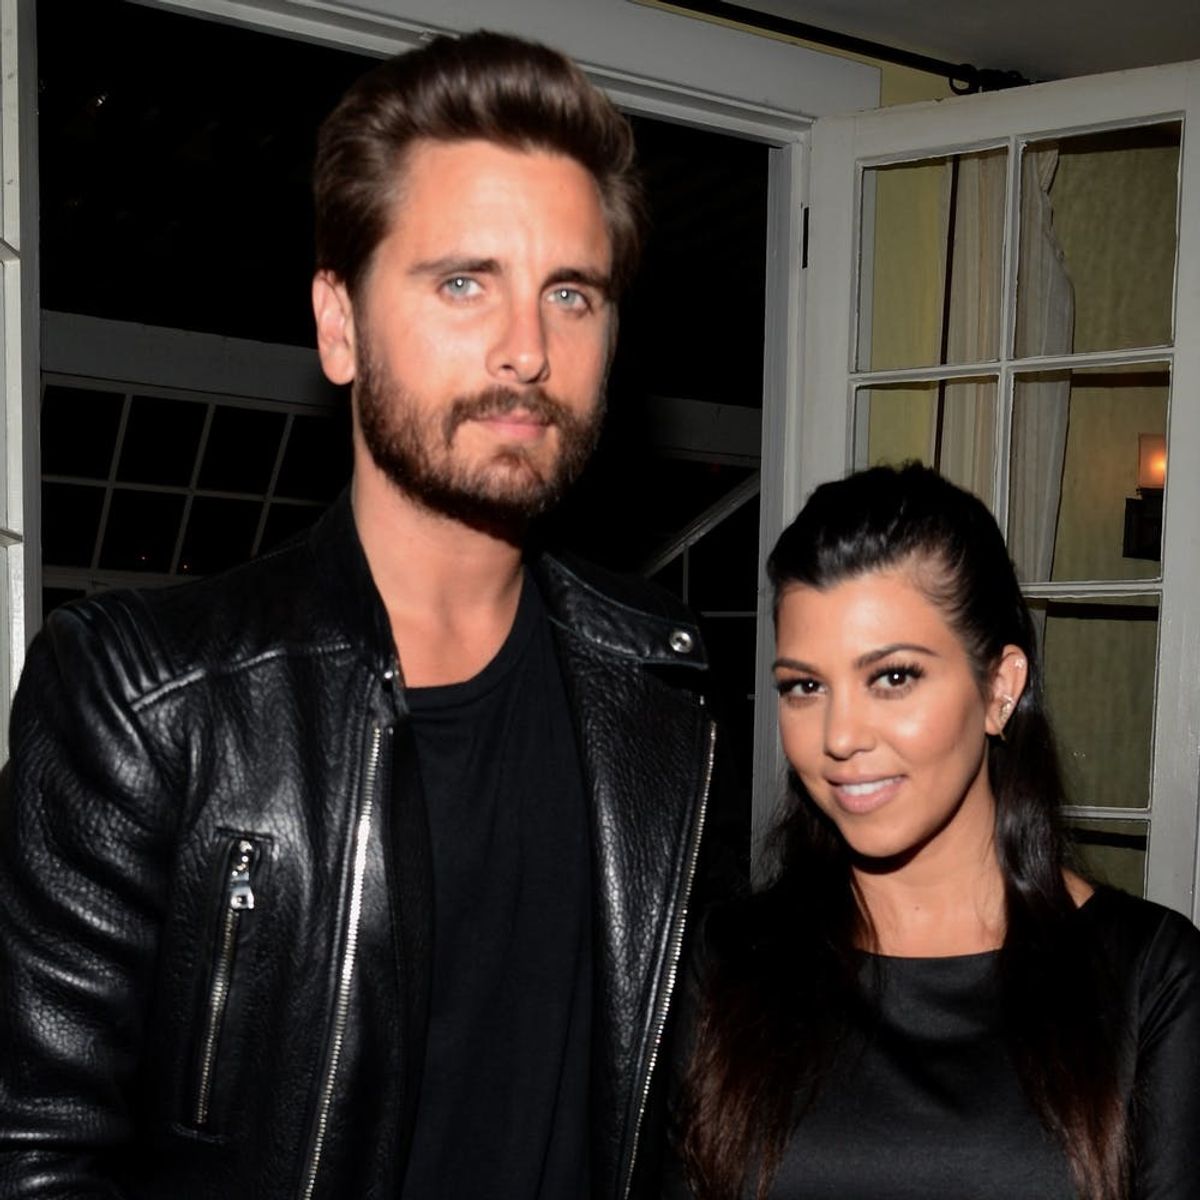 Khloé Kardashian Has Had It With Sister Kourtney and Scott Disick’s “Dysfunctional” Relationship